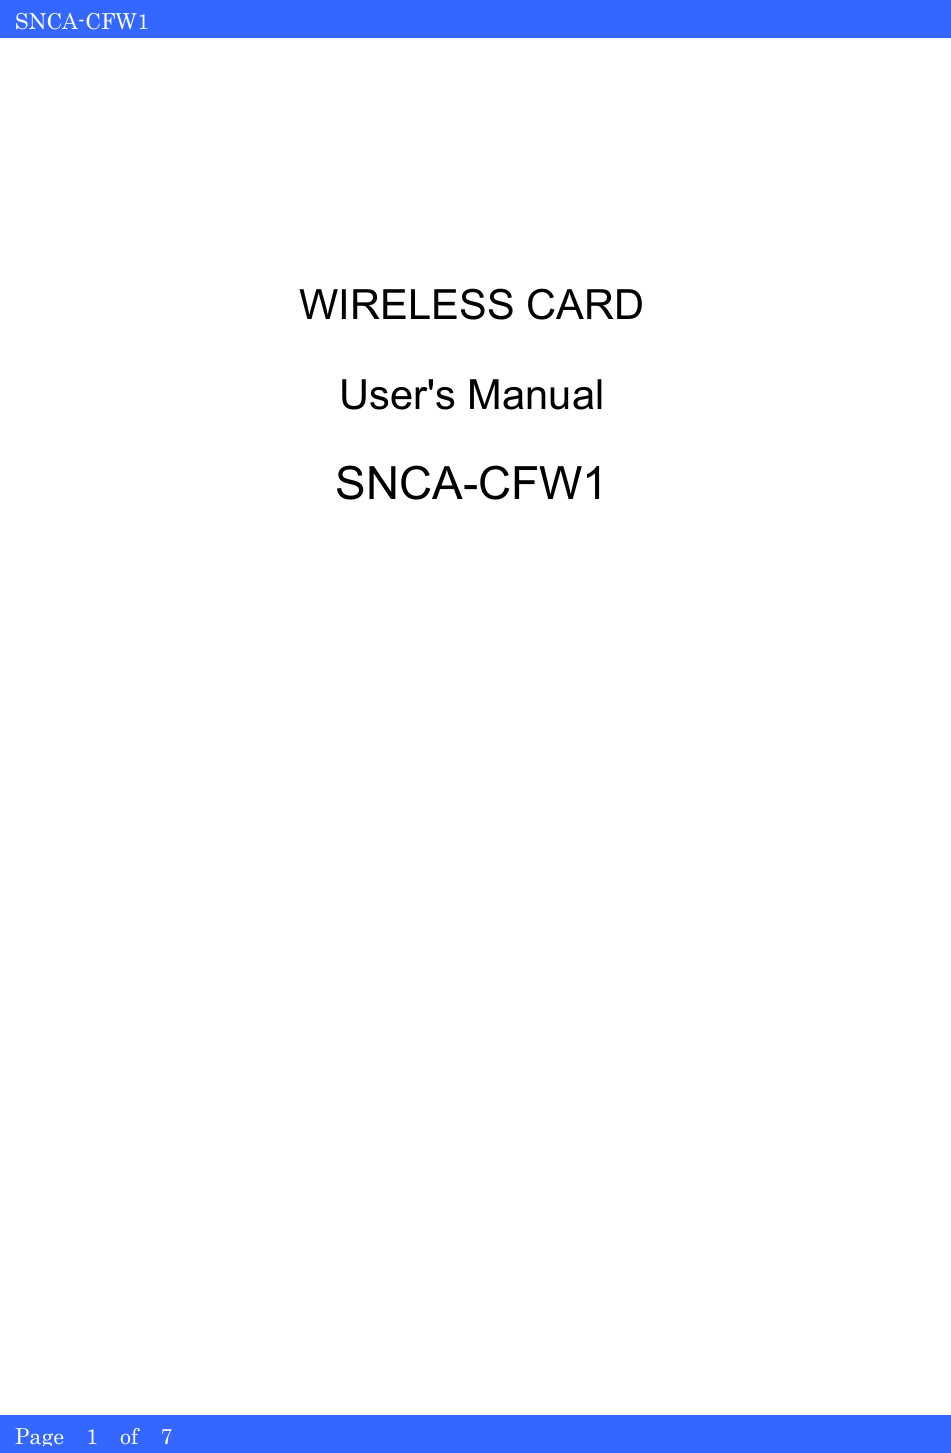   SNCA-CFW1 Page  1  of  7         WIRELESS CARD  User&apos;s Manual  SNCA-CFW1 